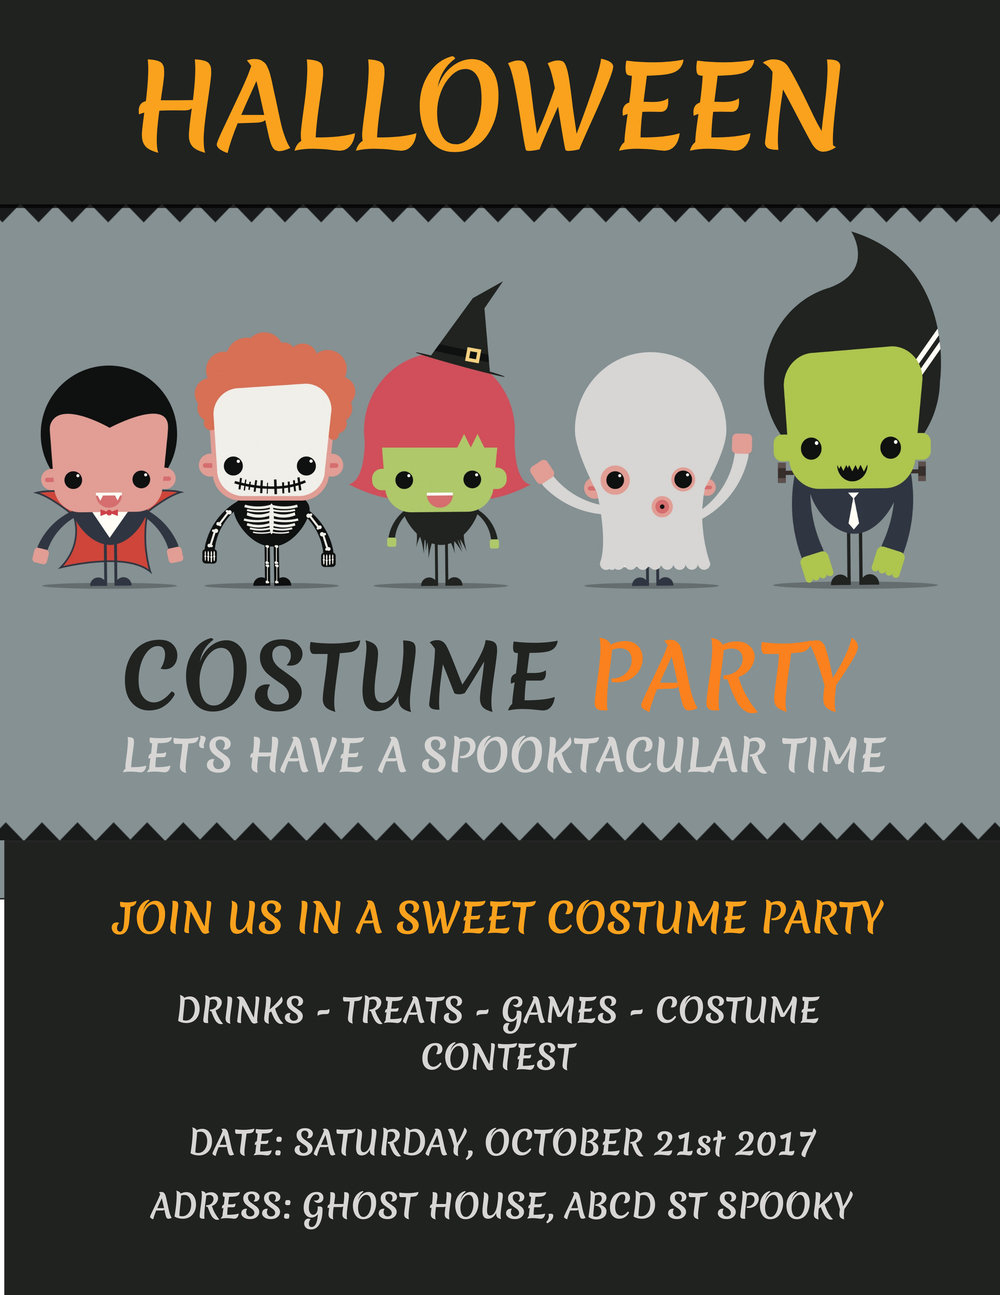 6 Fantastic Themes For Your Halloween Posters | Design Studio With Regard To Halloween Costume Party Flyer Templates